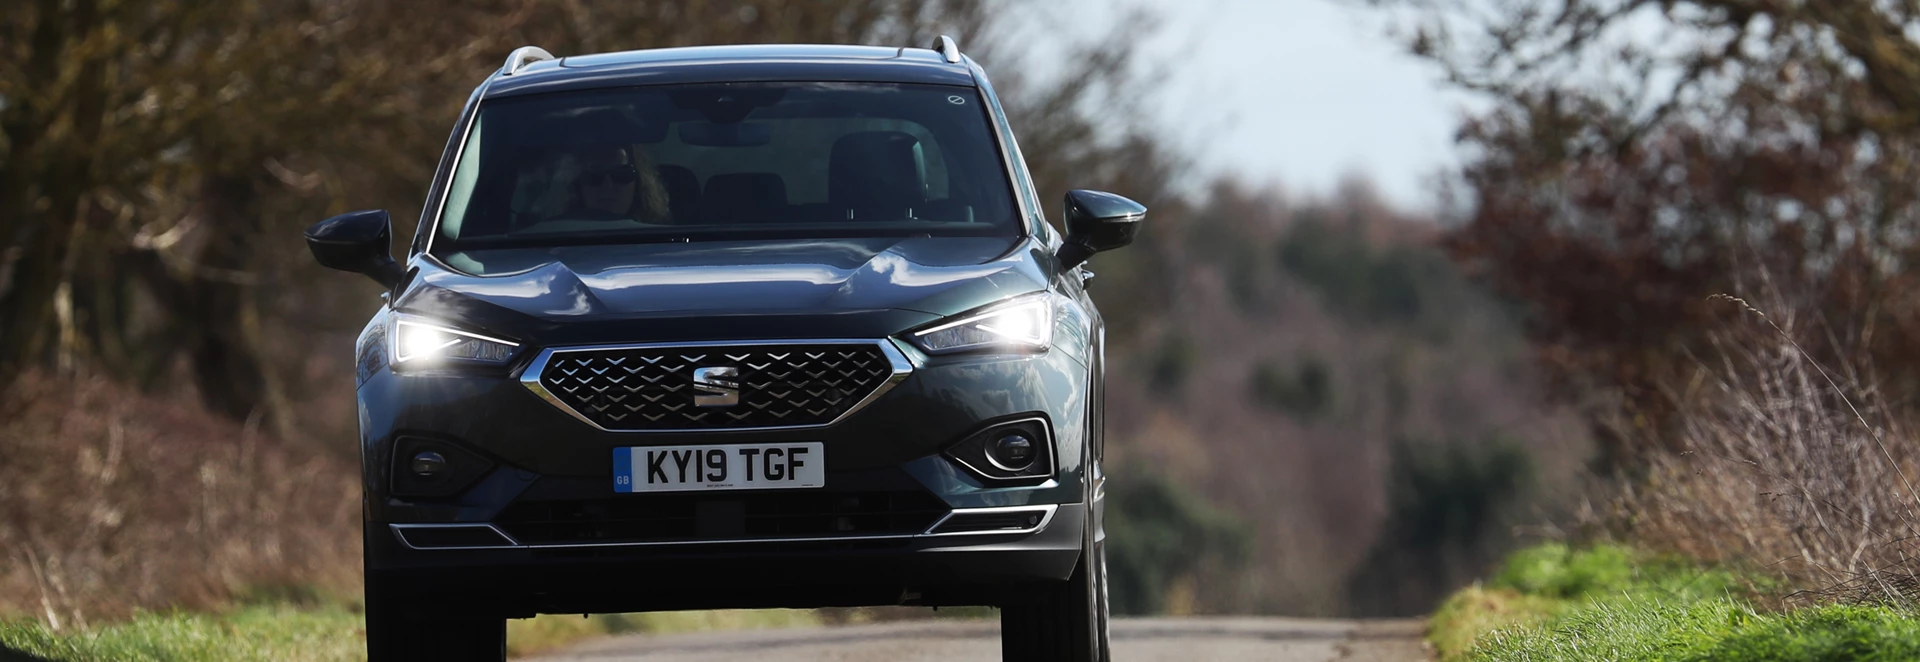 Buyer’s guide to the Seat Tarraco